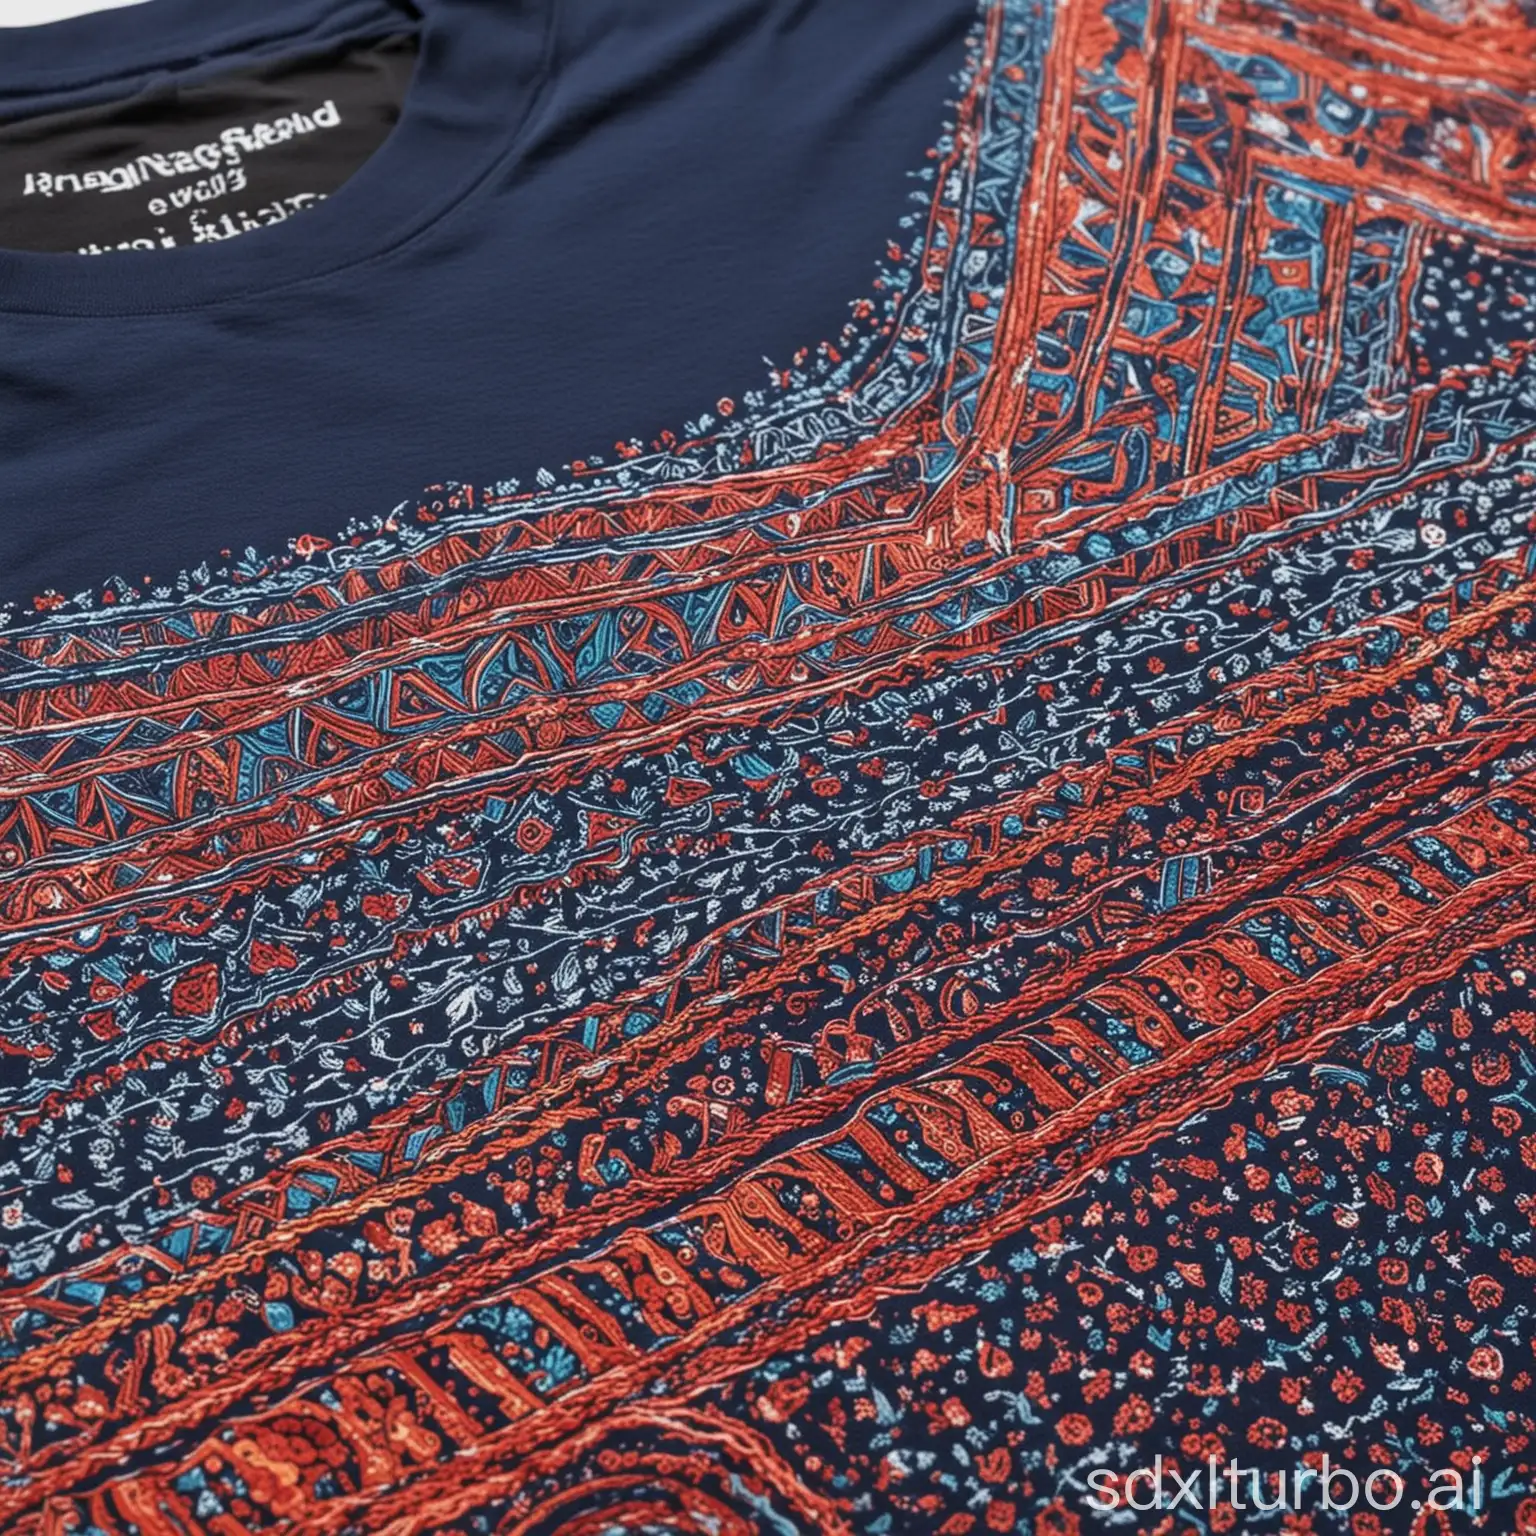 Soft-and-Colorful-TShirt-Intricate-Design-and-HighQuality-Fabric-CloseUp